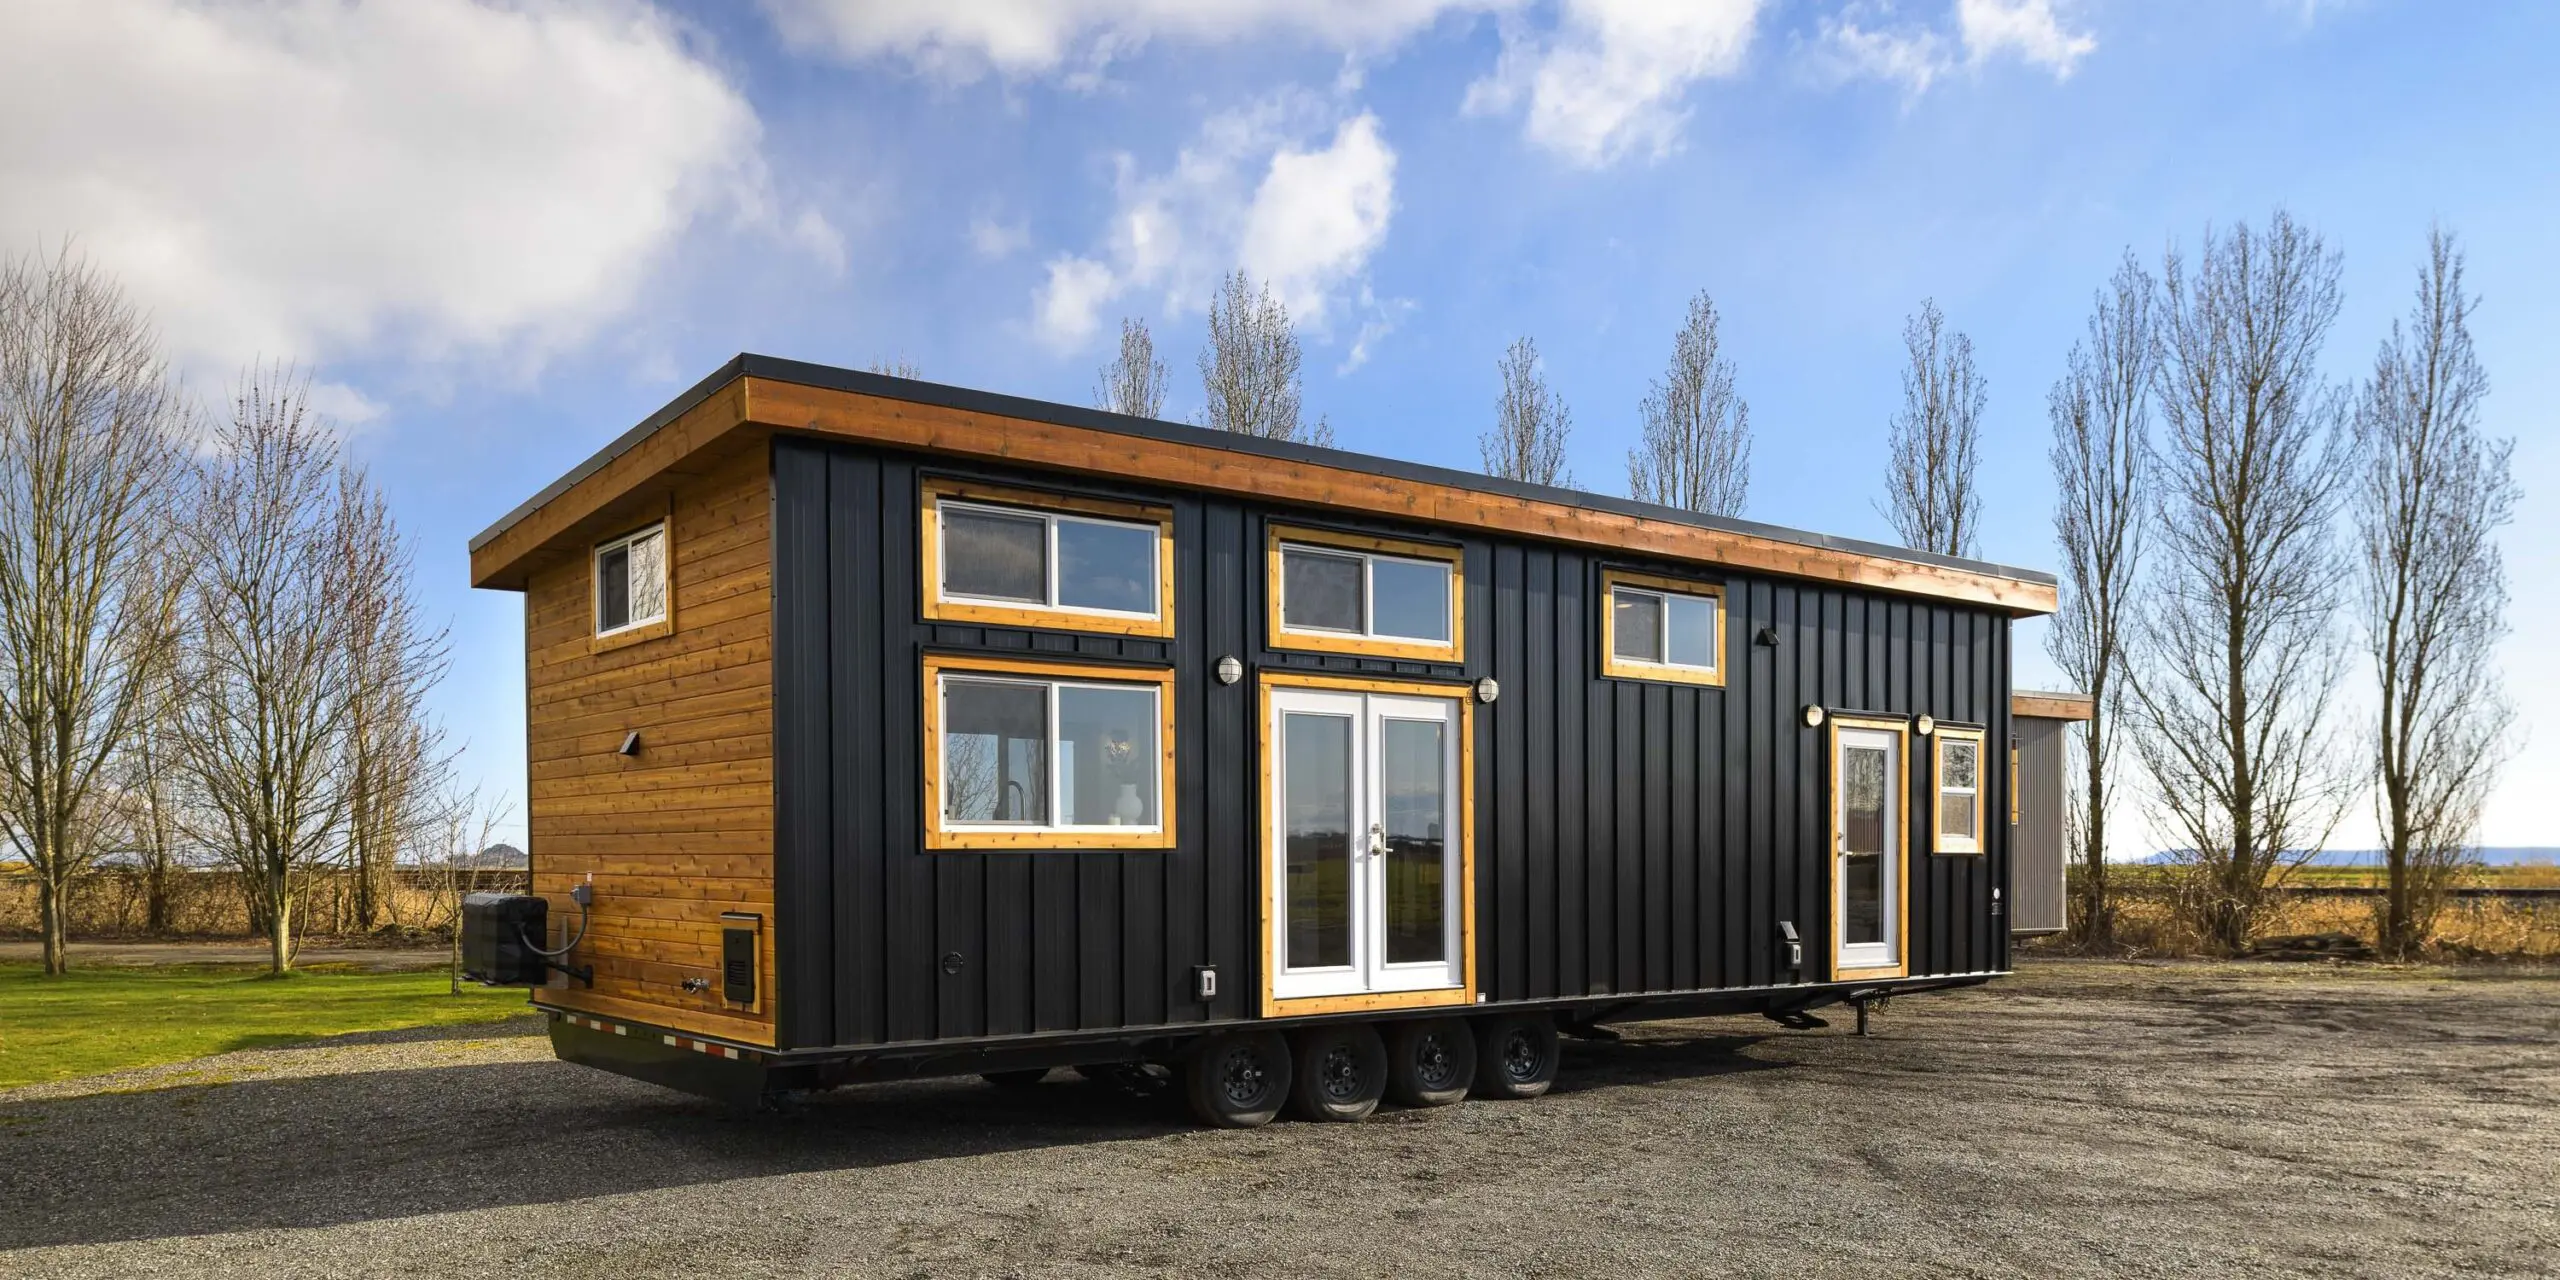 Want to jump on the 'granny flat' trend? This company was created